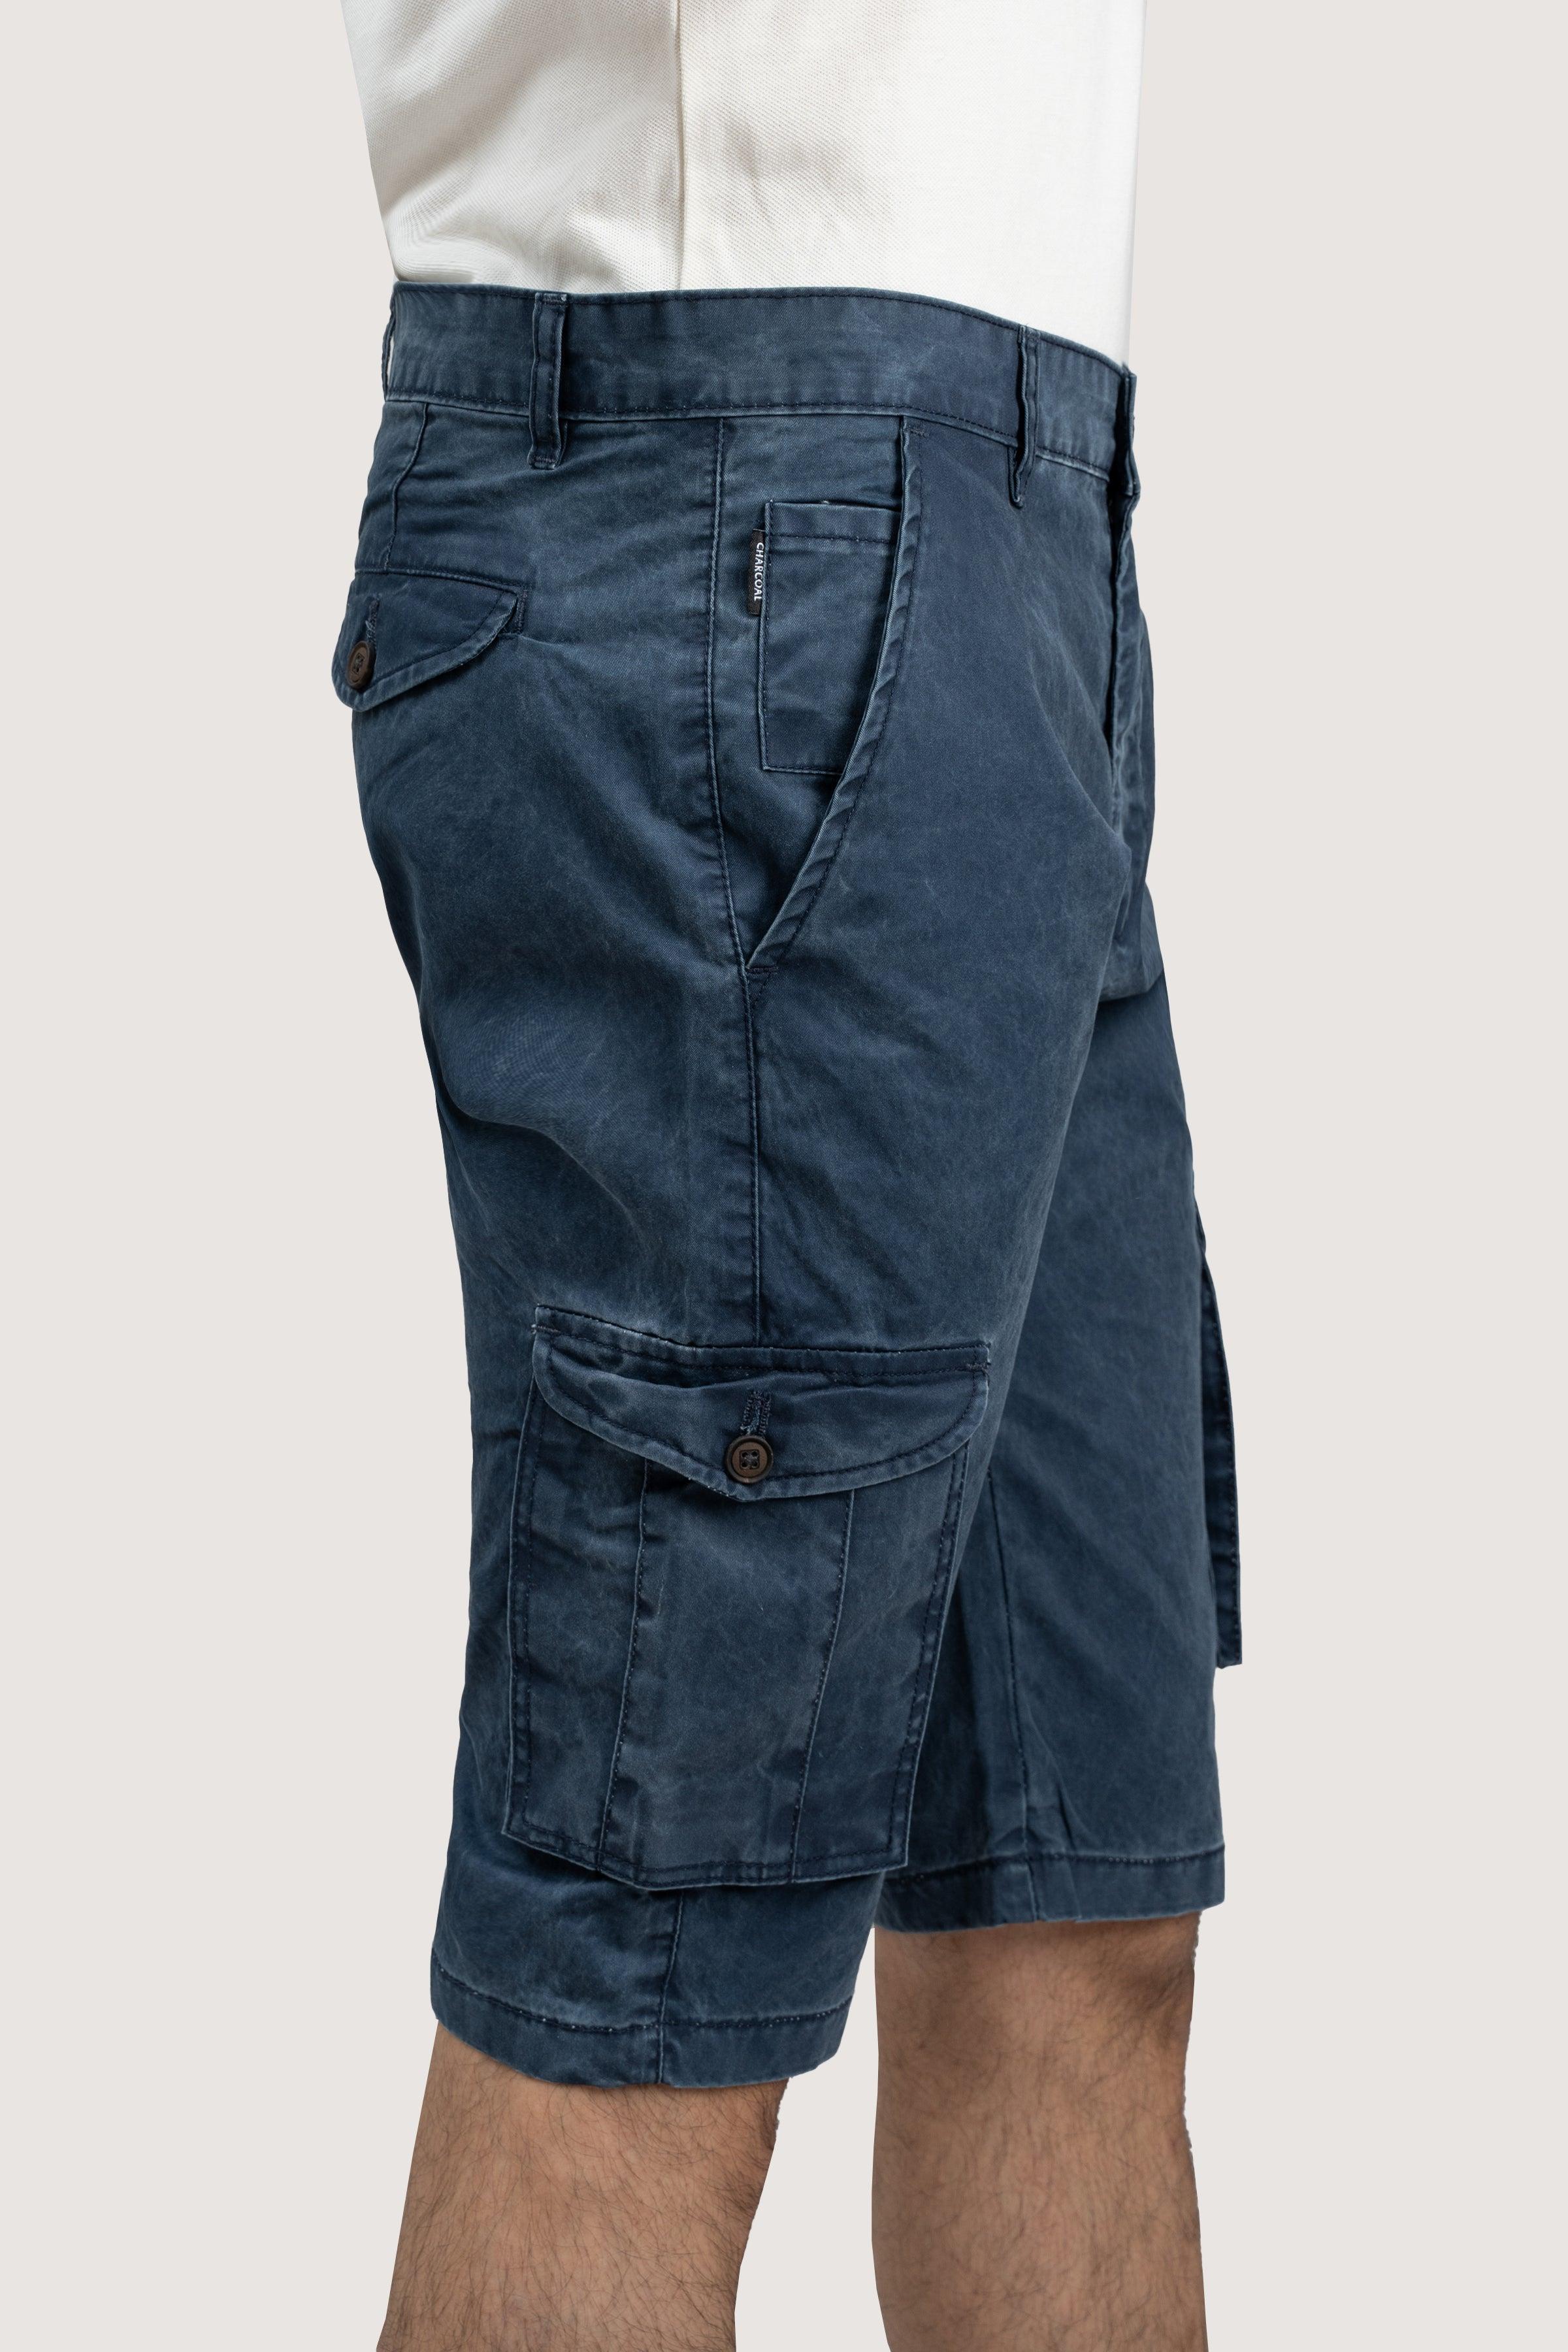 CARGO ENZYME WASHED REGULAR FIT NAVY SHORTS at Charcoal Clothing